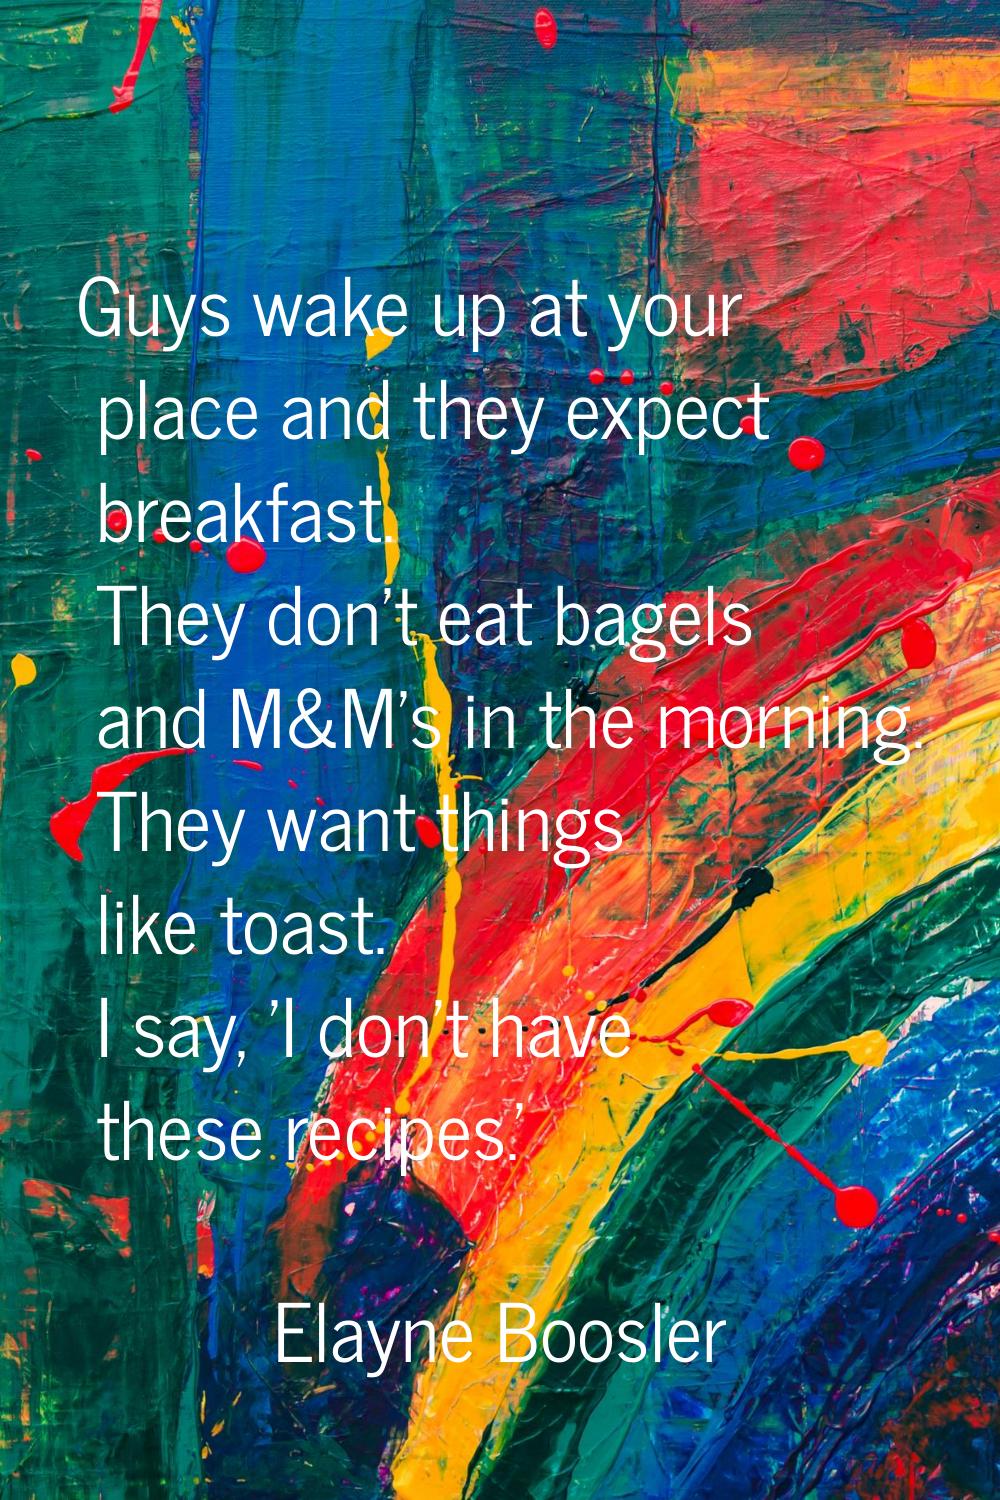 Guys wake up at your place and they expect breakfast. They don't eat bagels and M&M's in the mornin